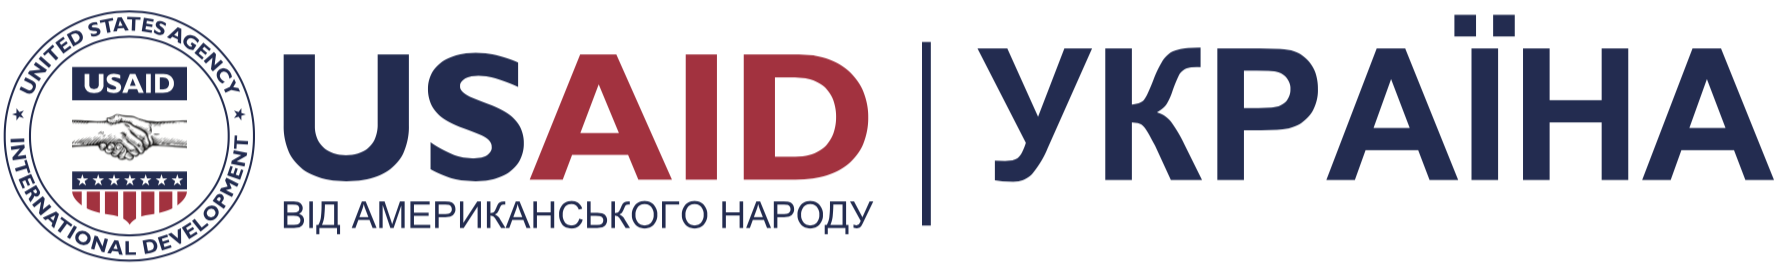 USAID To Allocate $10 Million To Fund "Ukrainian Activists" For The Forming Of "Civil Society"